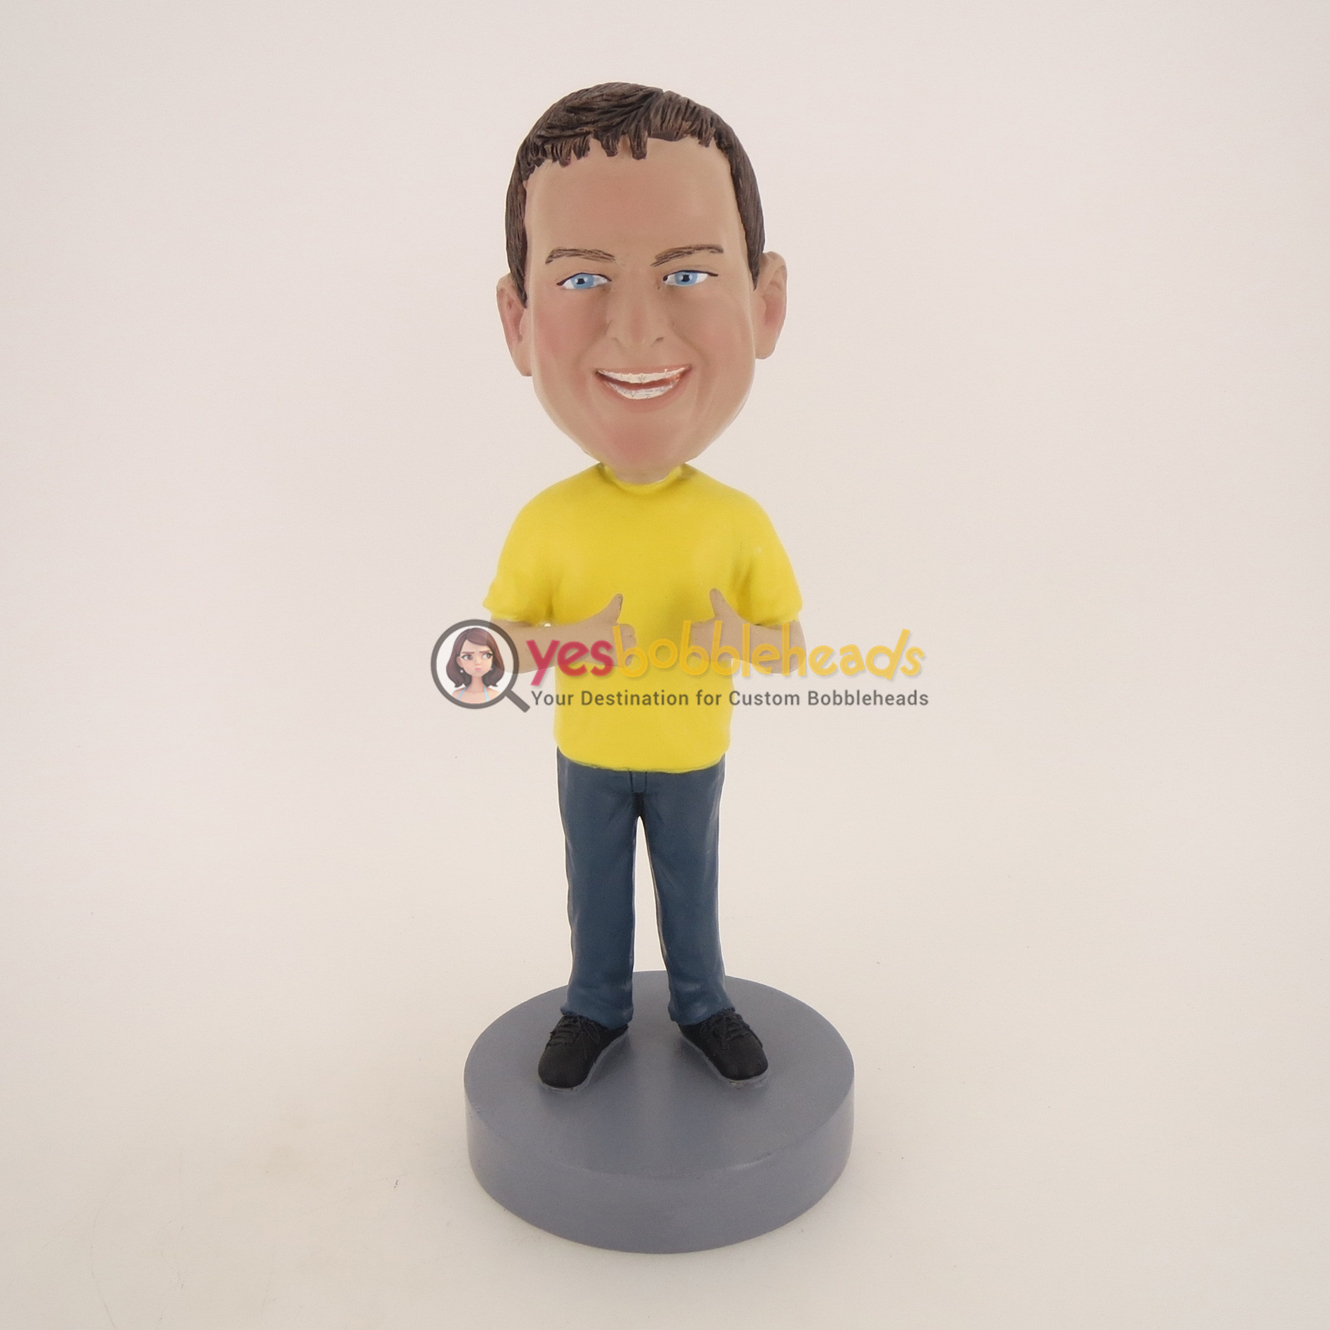 Picture of Custom Bobblehead Doll: Big Boy Thumbs Up Happily